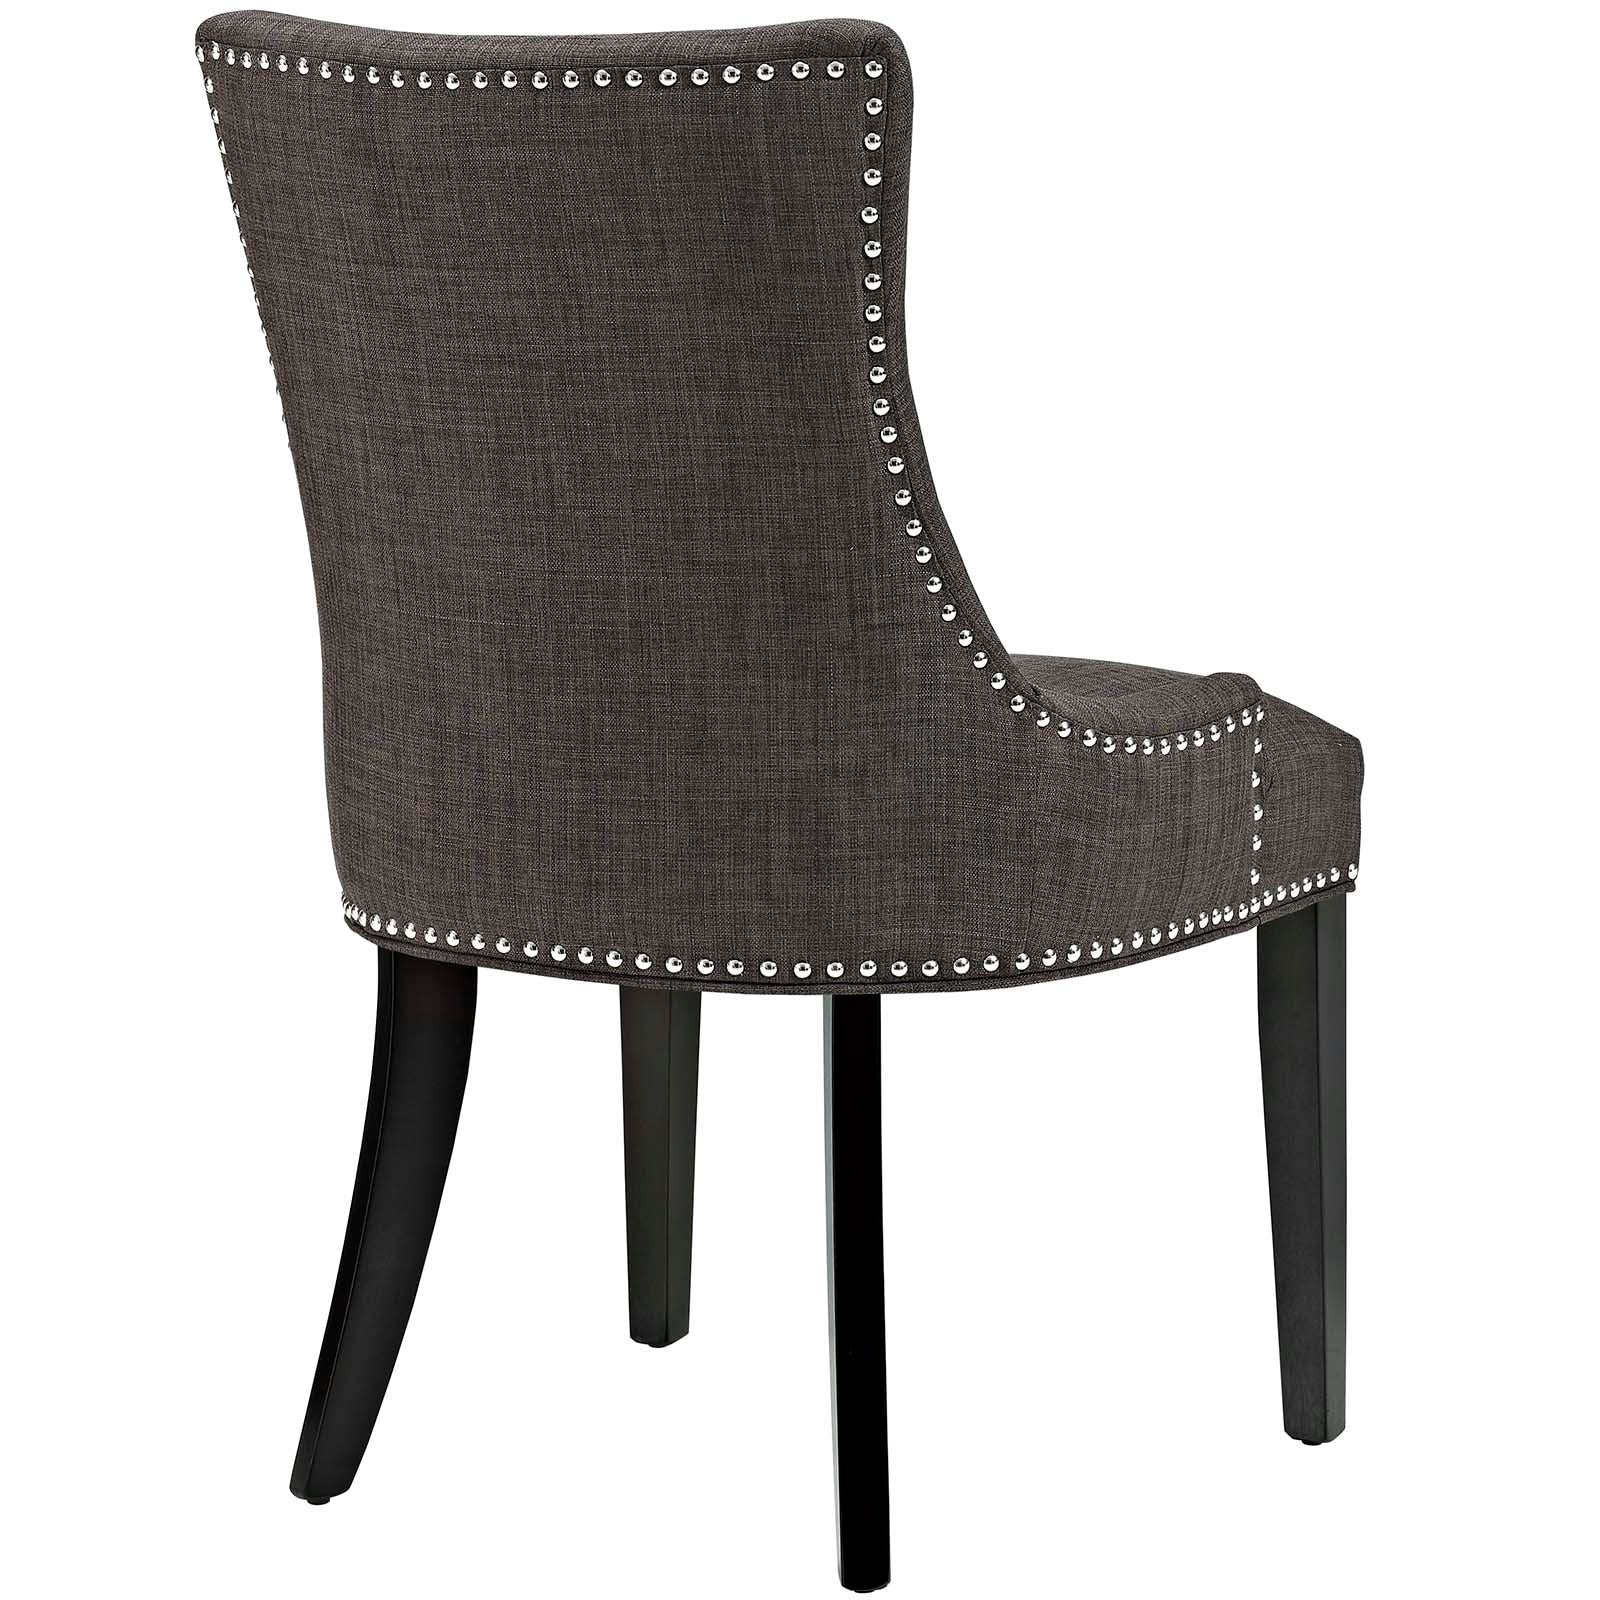 Marquis Dining Chair Fabric Set of 4 - East Shore Modern Home Furnishings